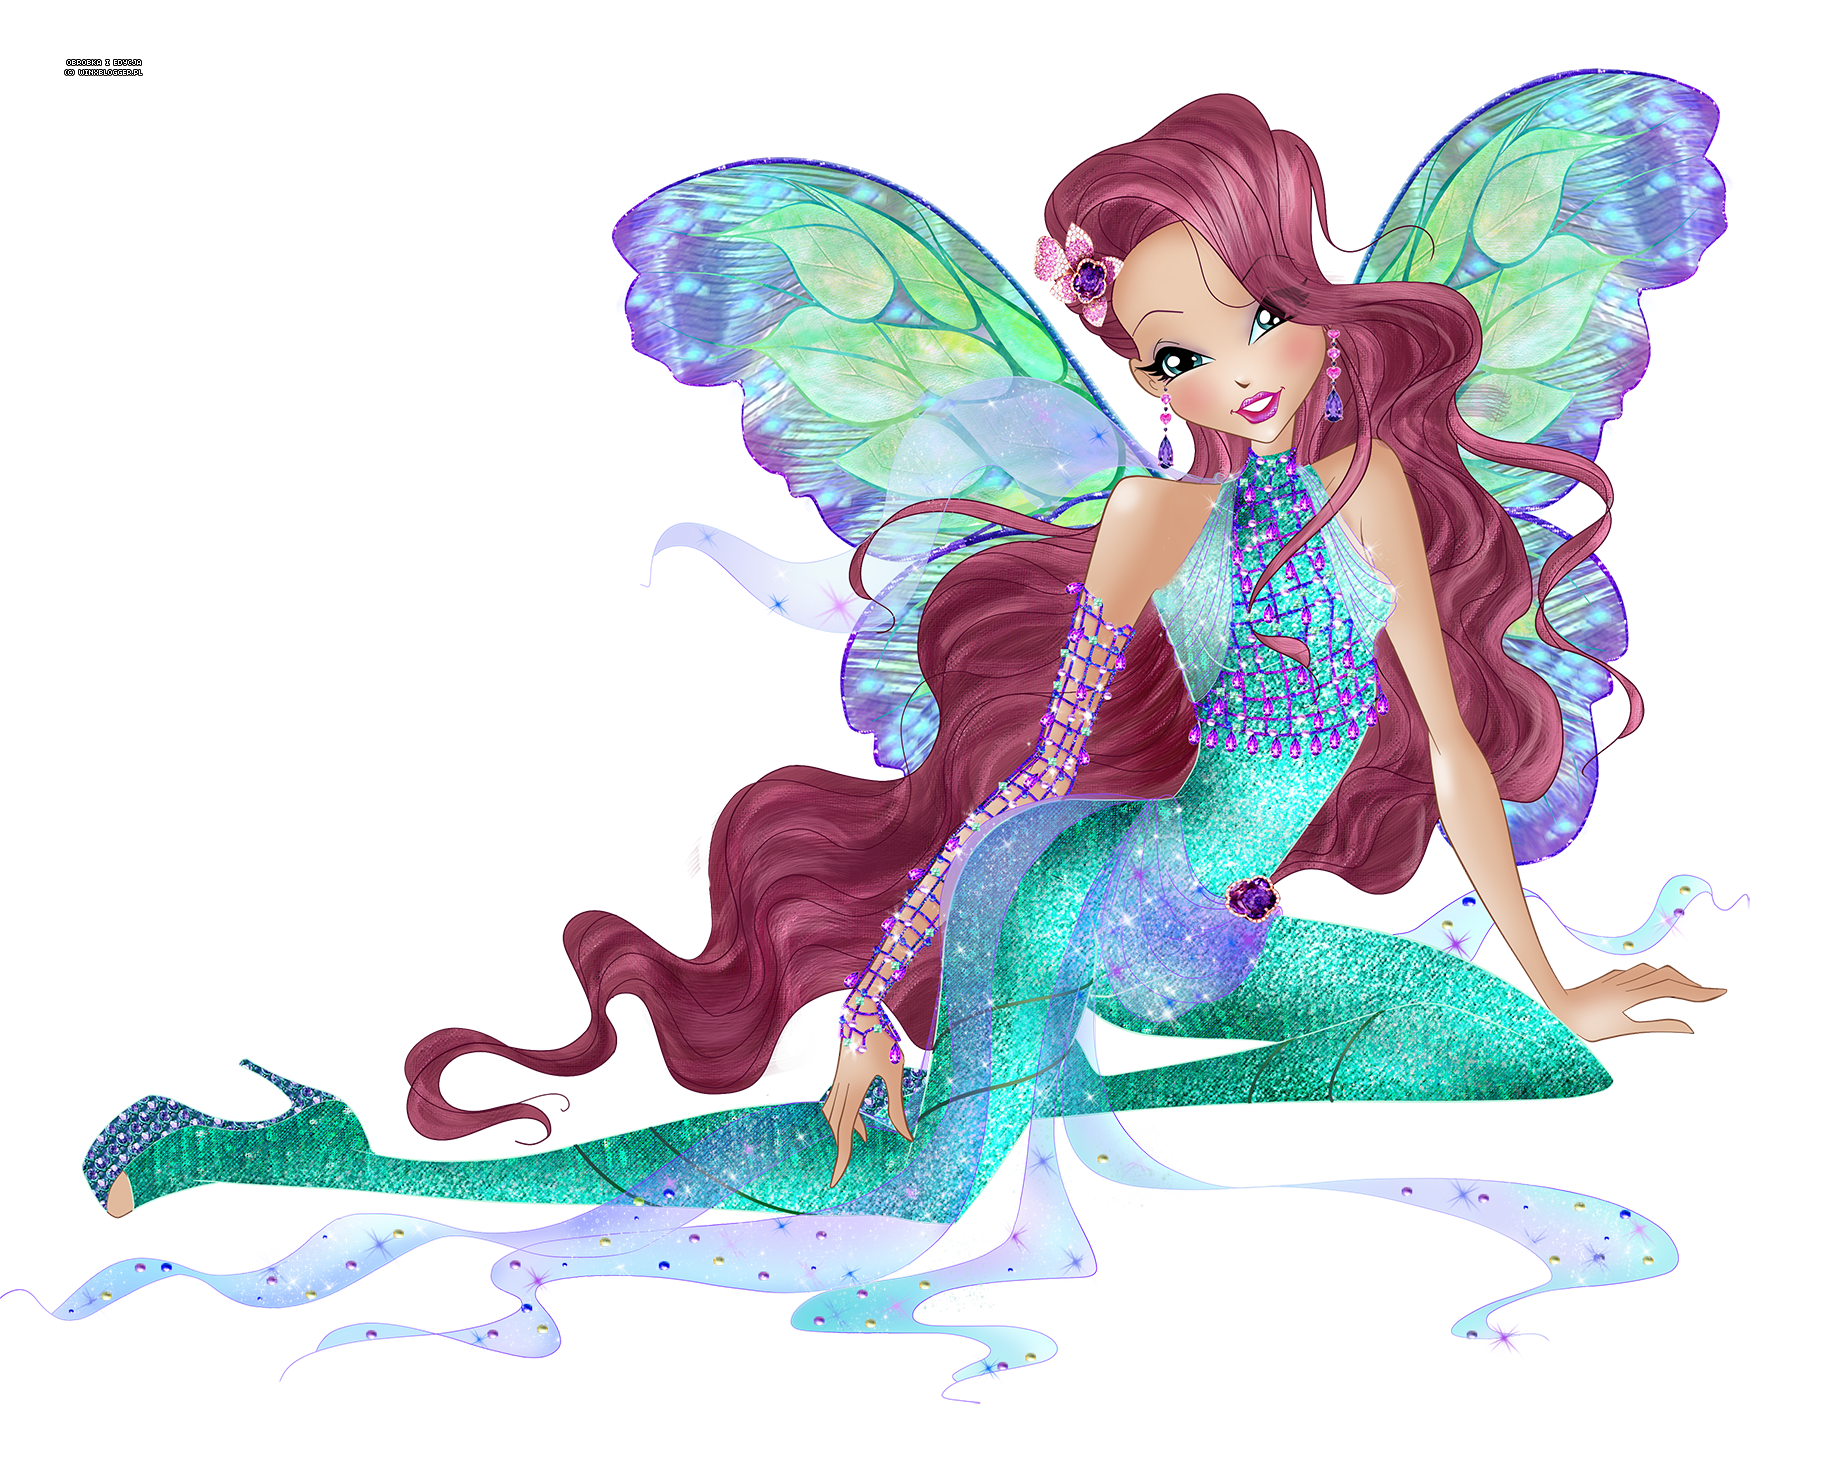 Aisha_-_DXF_-_A02_WinxClubRus.png